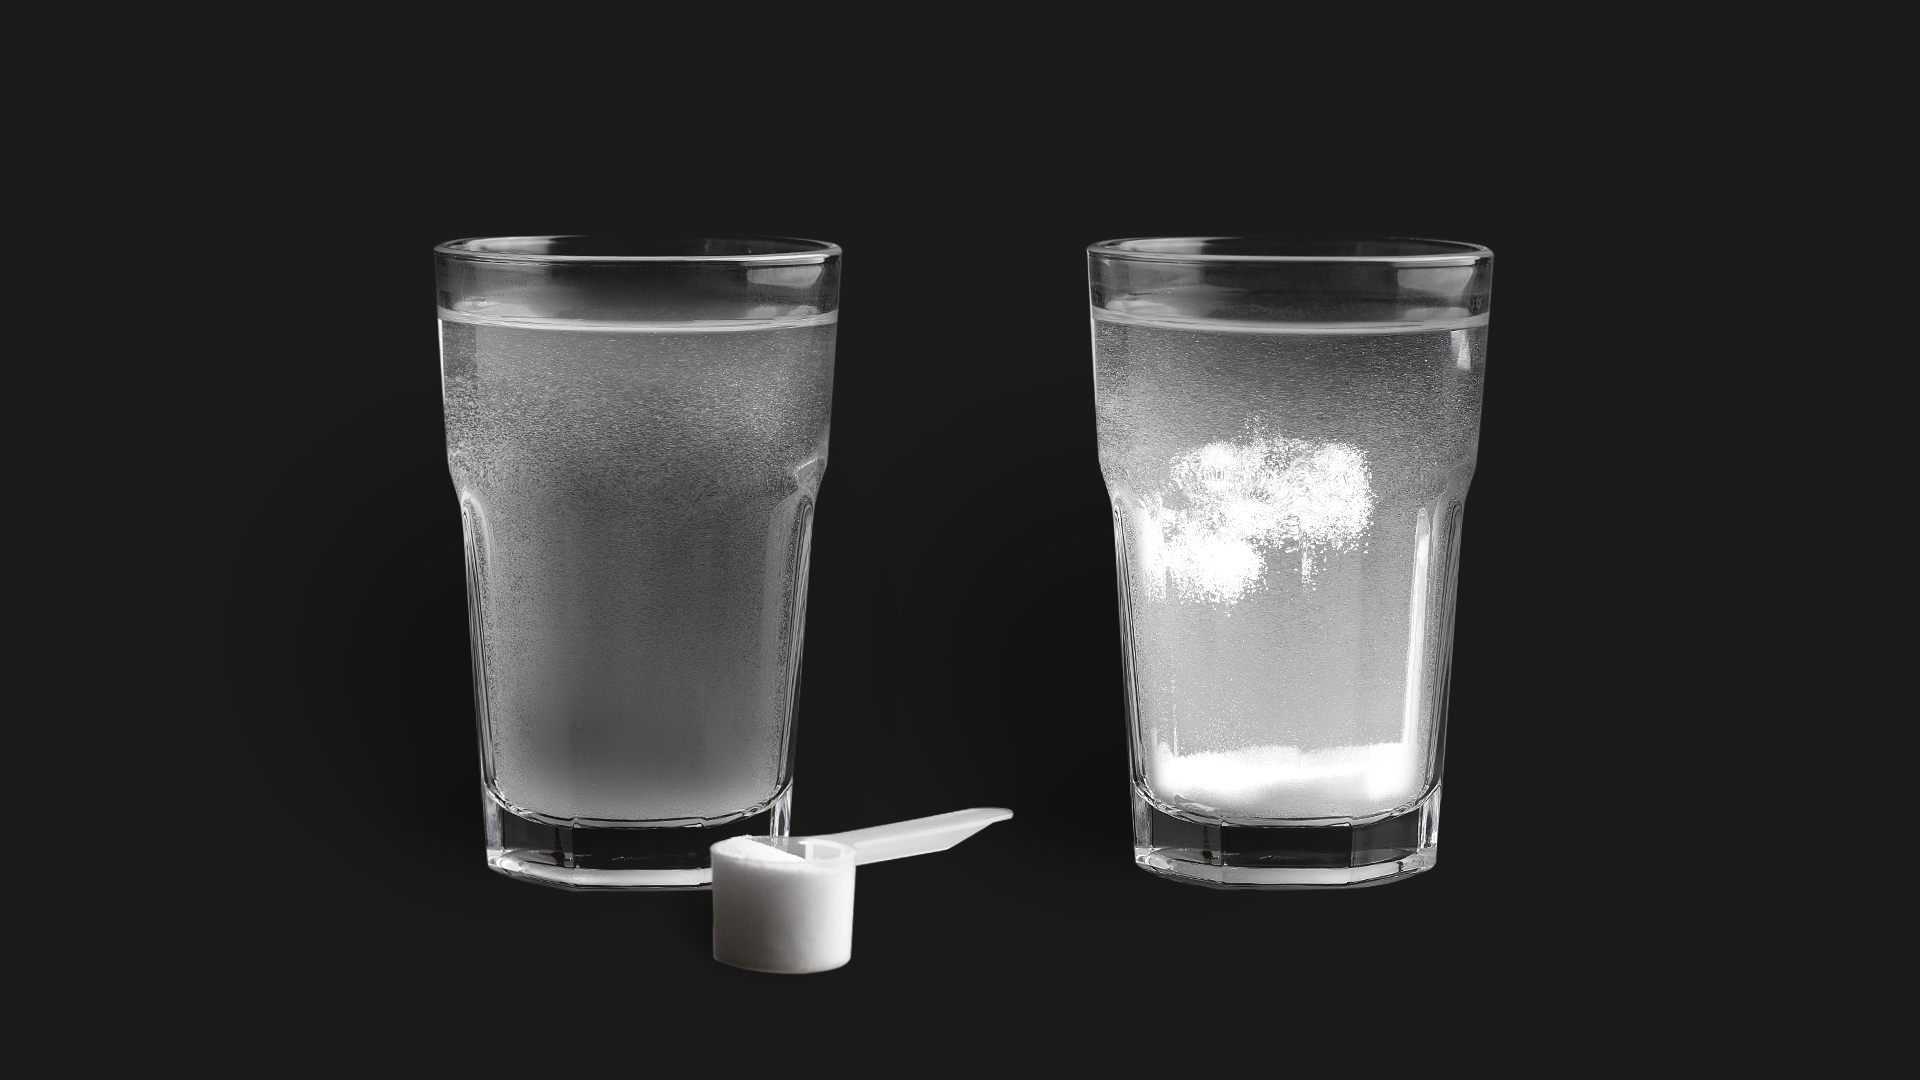 Image sowing two glasses, one with an even mixture, and the other one supersaturated with sugar